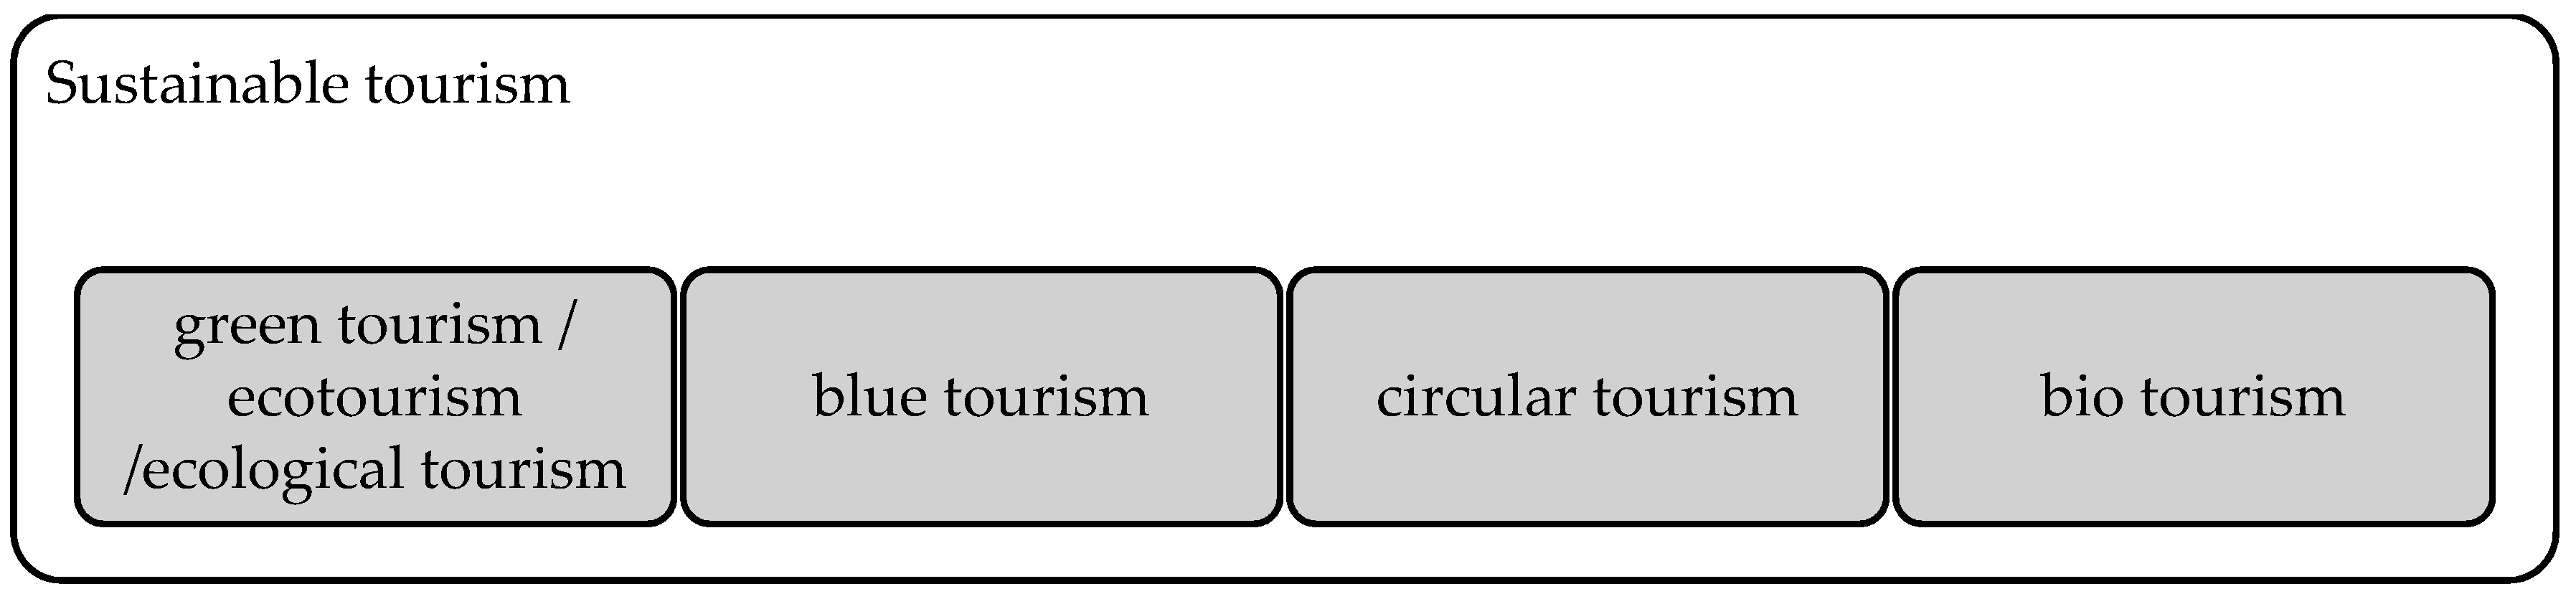 bibliometric analysis and literature review of ecotourism toward sustainable development